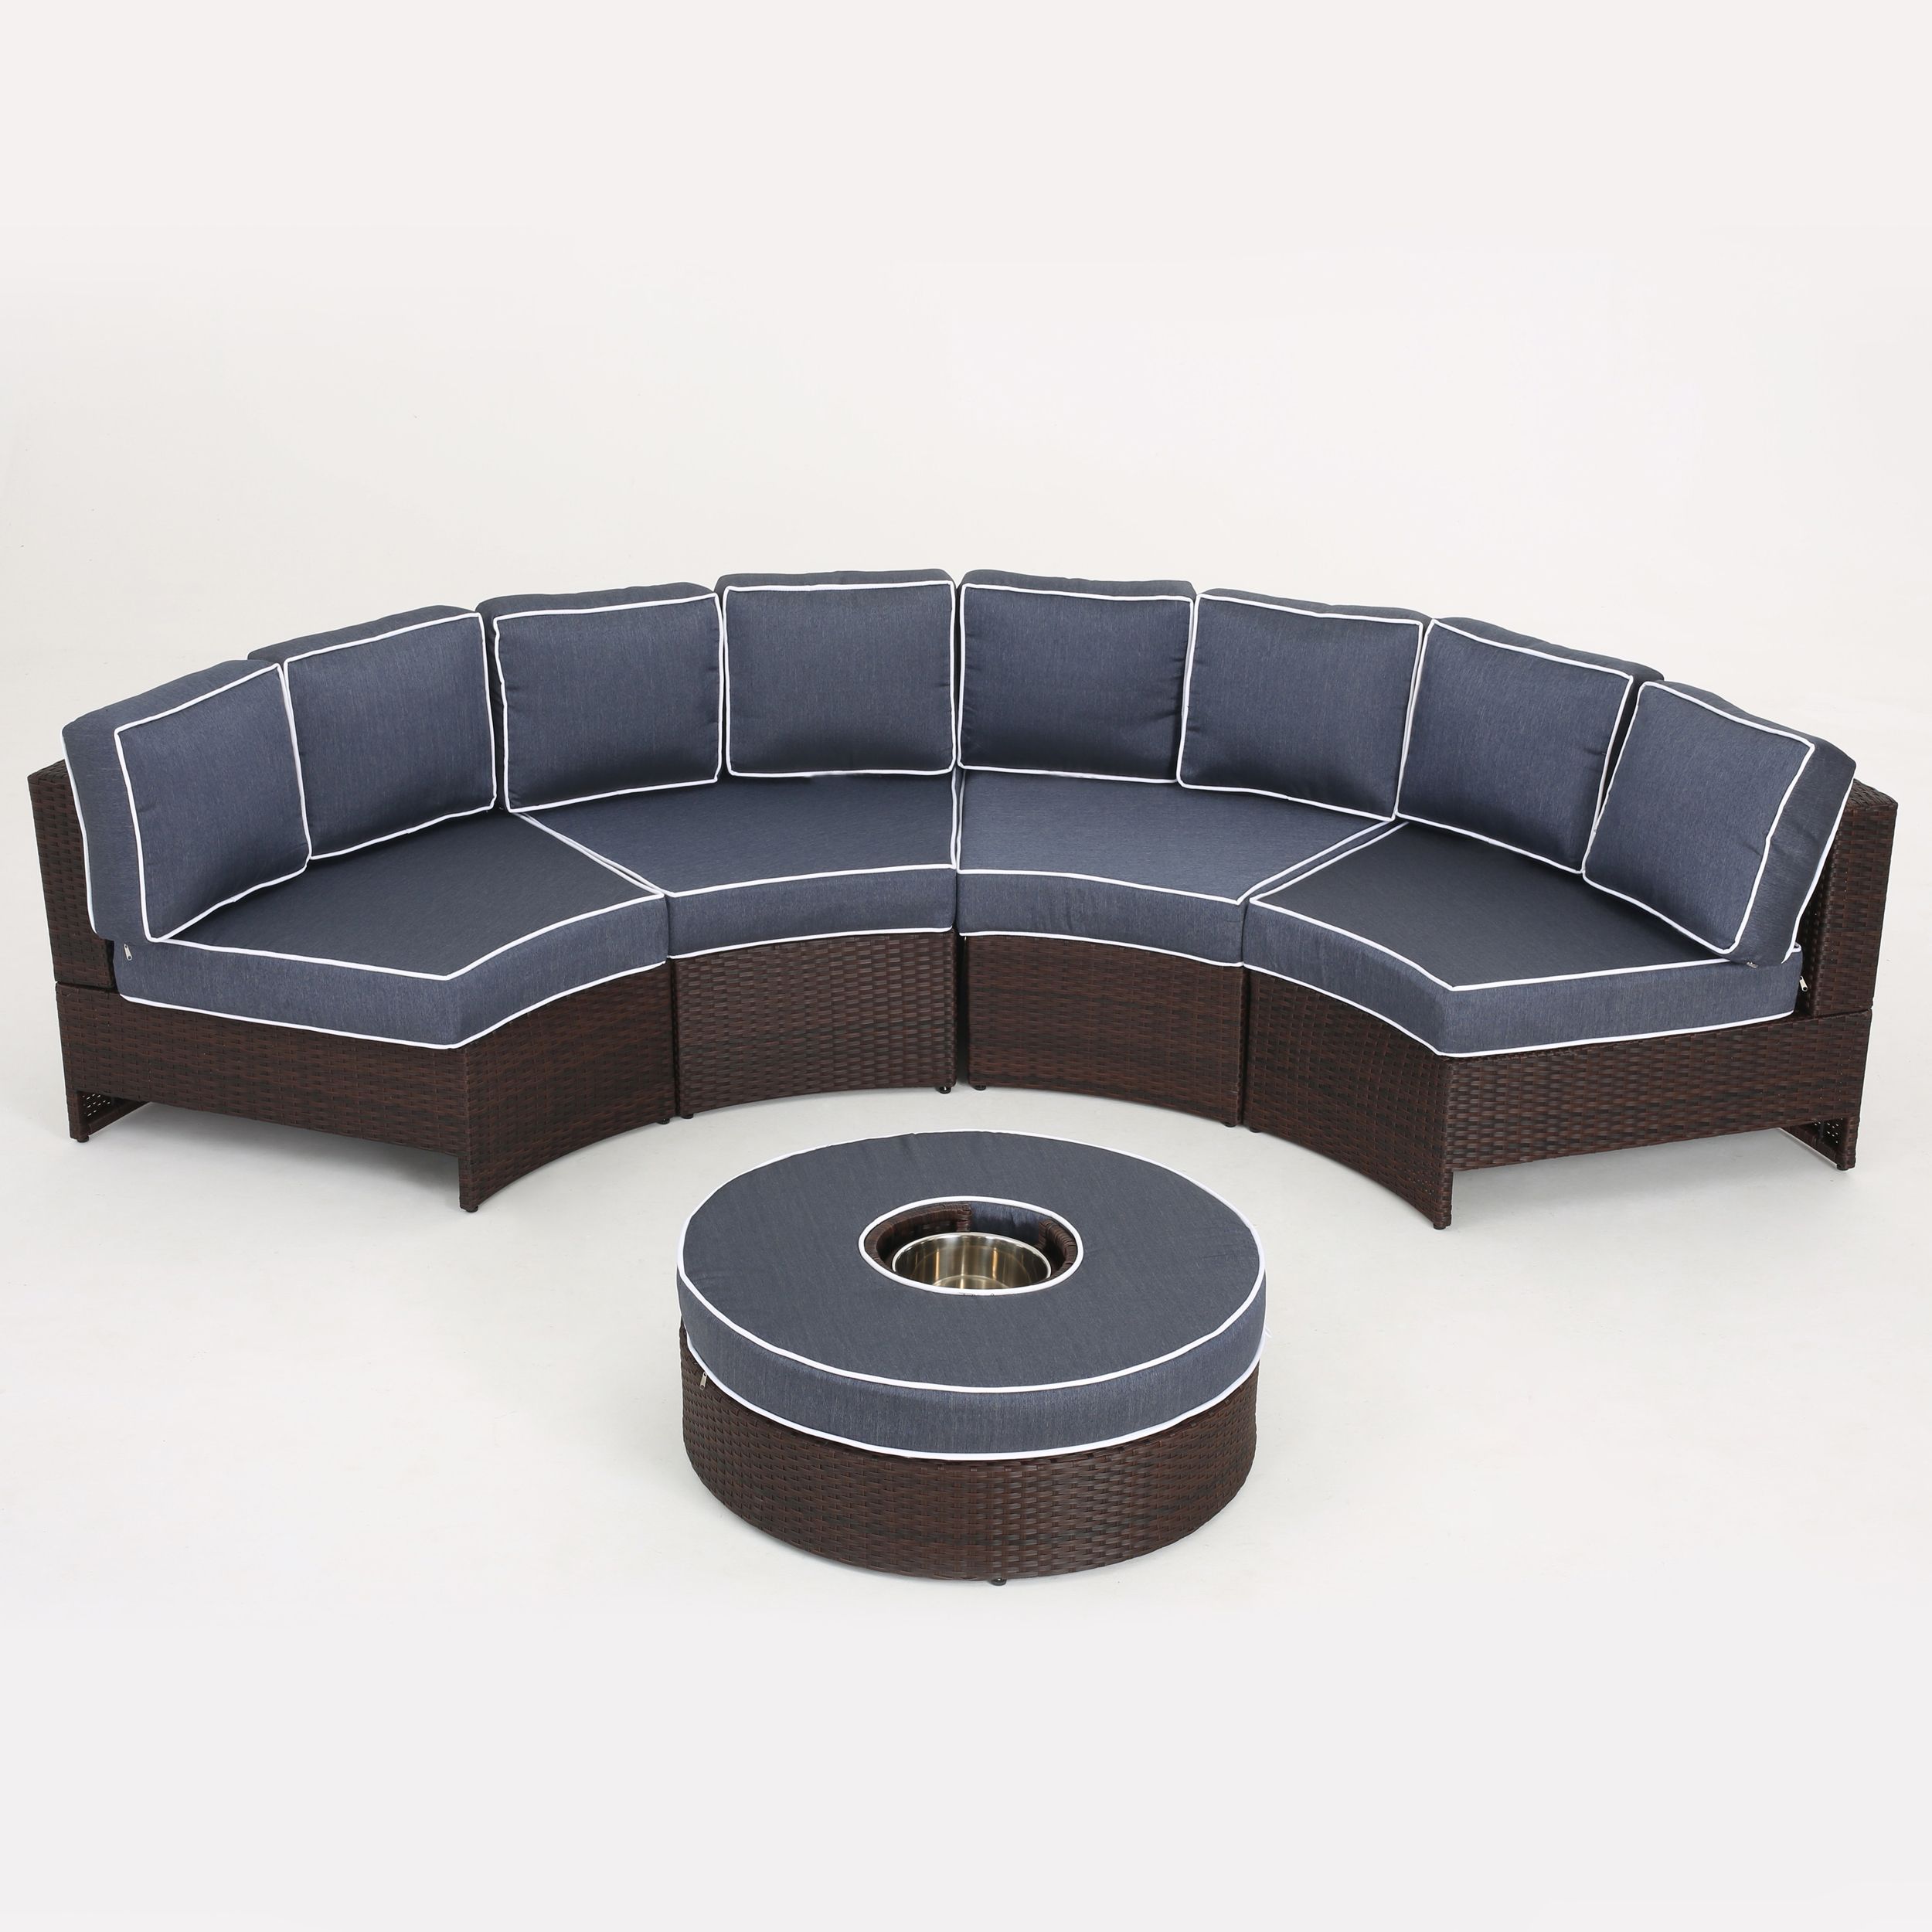 Navy Outdoor Seating Sectional Patio Sets Throughout Current Riviera Ponza Outdoor Wicker 5 Piece Semicircular Sectional Sofa (View 8 of 15)